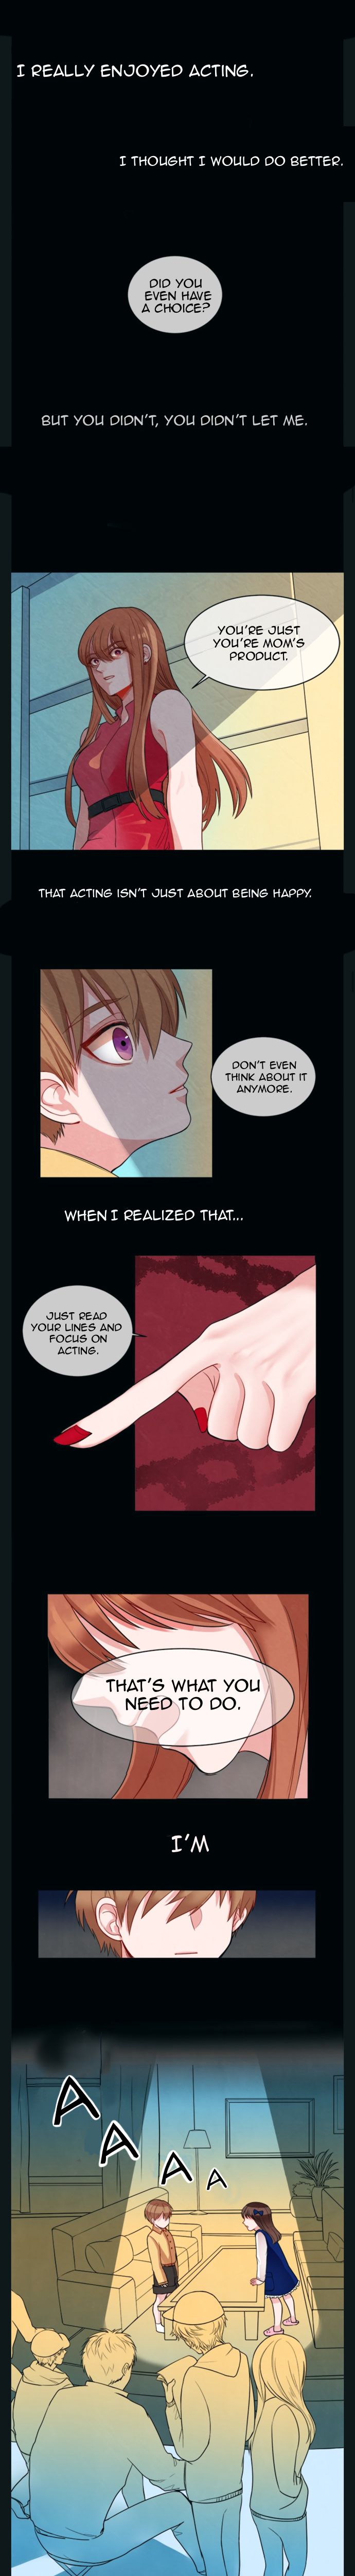 Between The Devil And Me - Page 1